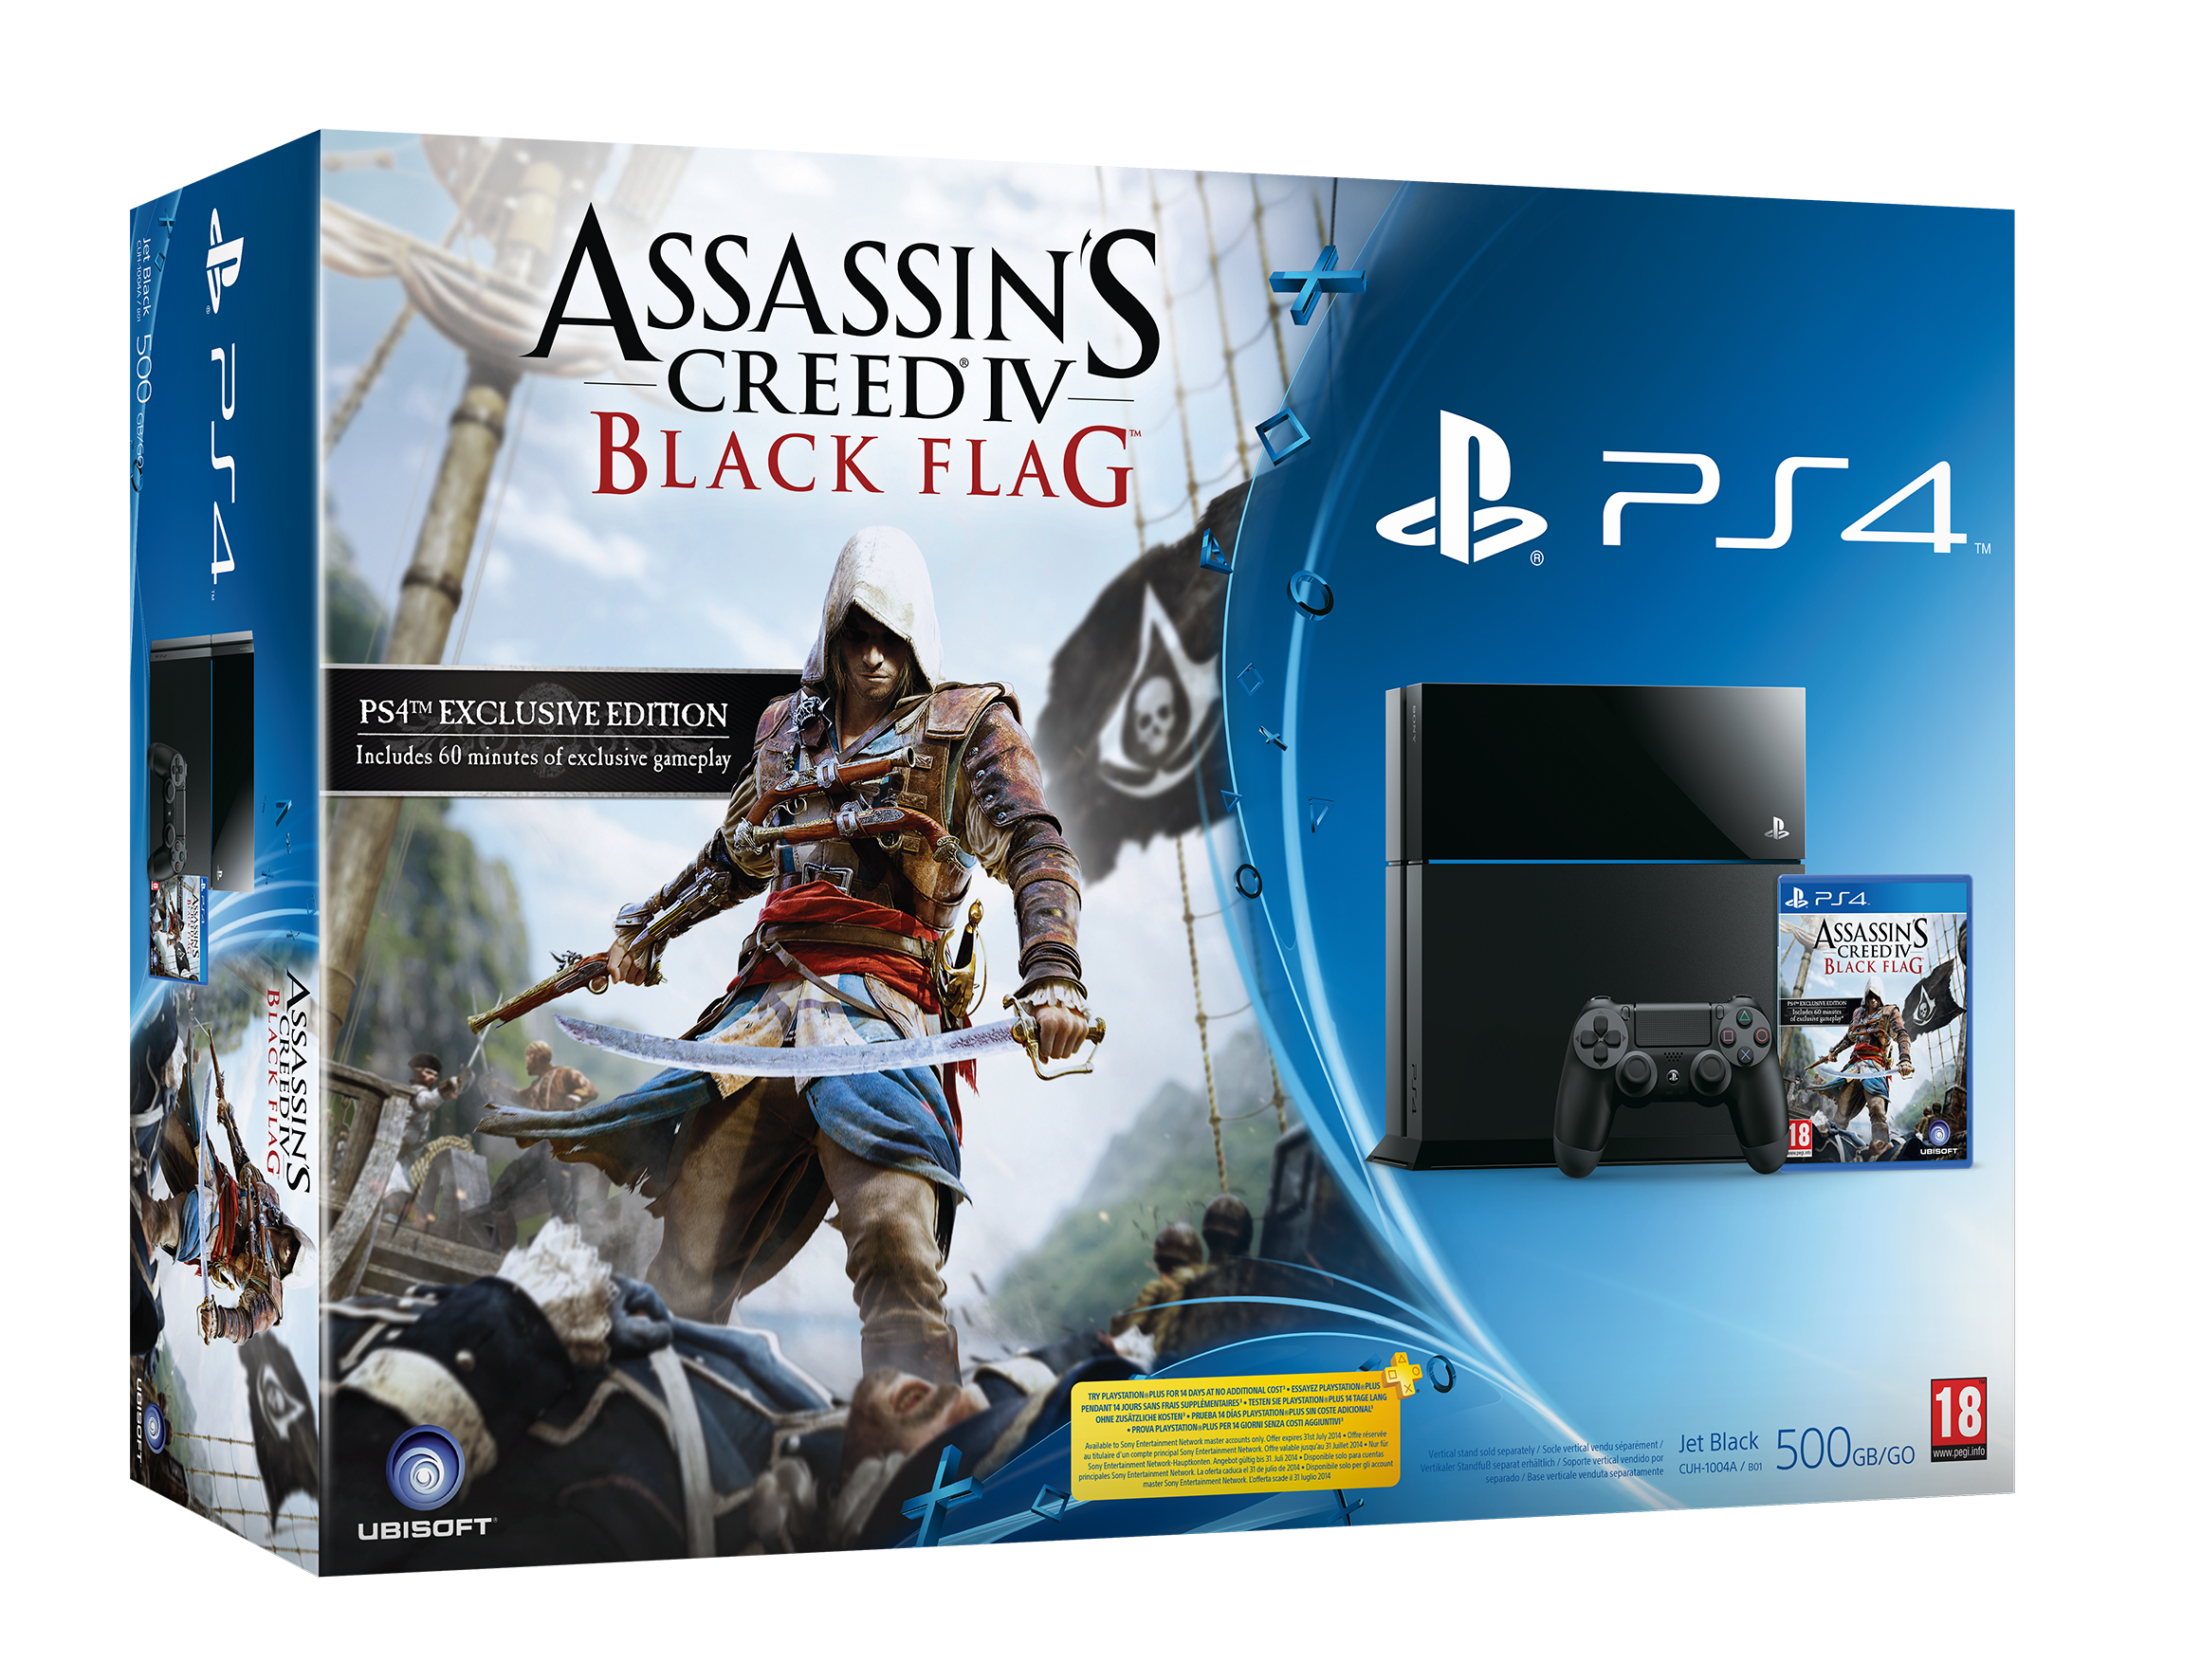 Ps4 12. Ассасин Крид 4 на ПС 4 диск. Assassin's Creed единство ps4. Assassin's Creed 3 ps4 диск. Ассасин игра плейстейшен 4.